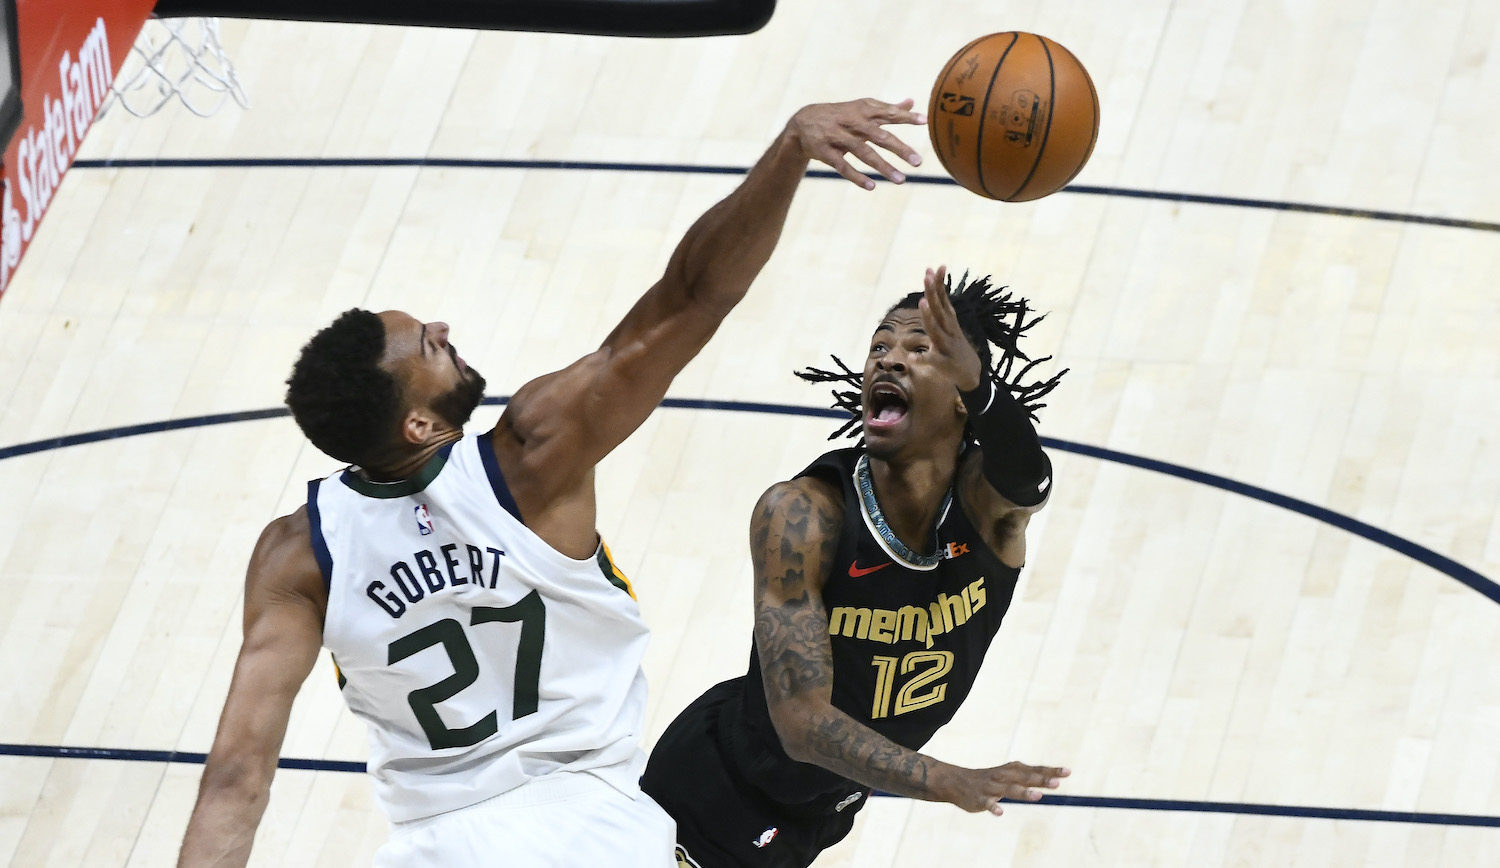 SALT LAKE CITY, UTAH - MAY 23: Rudy Gobert #27 of the Utah Jazz blocks Ja Morant #12 of the Memphis Grizzlies in Game One of the Western Conference first-round playoff series at Vivint Smart Home Arena on May 23, 2021 in Salt Lake City, Utah. NOTE TO USER: User expressly acknowledges and agrees that, by downloading and/or using this photograph, user is consenting to the terms and conditions of the Getty Images License Agreement. (Photo by Alex Goodlett/Getty Images)